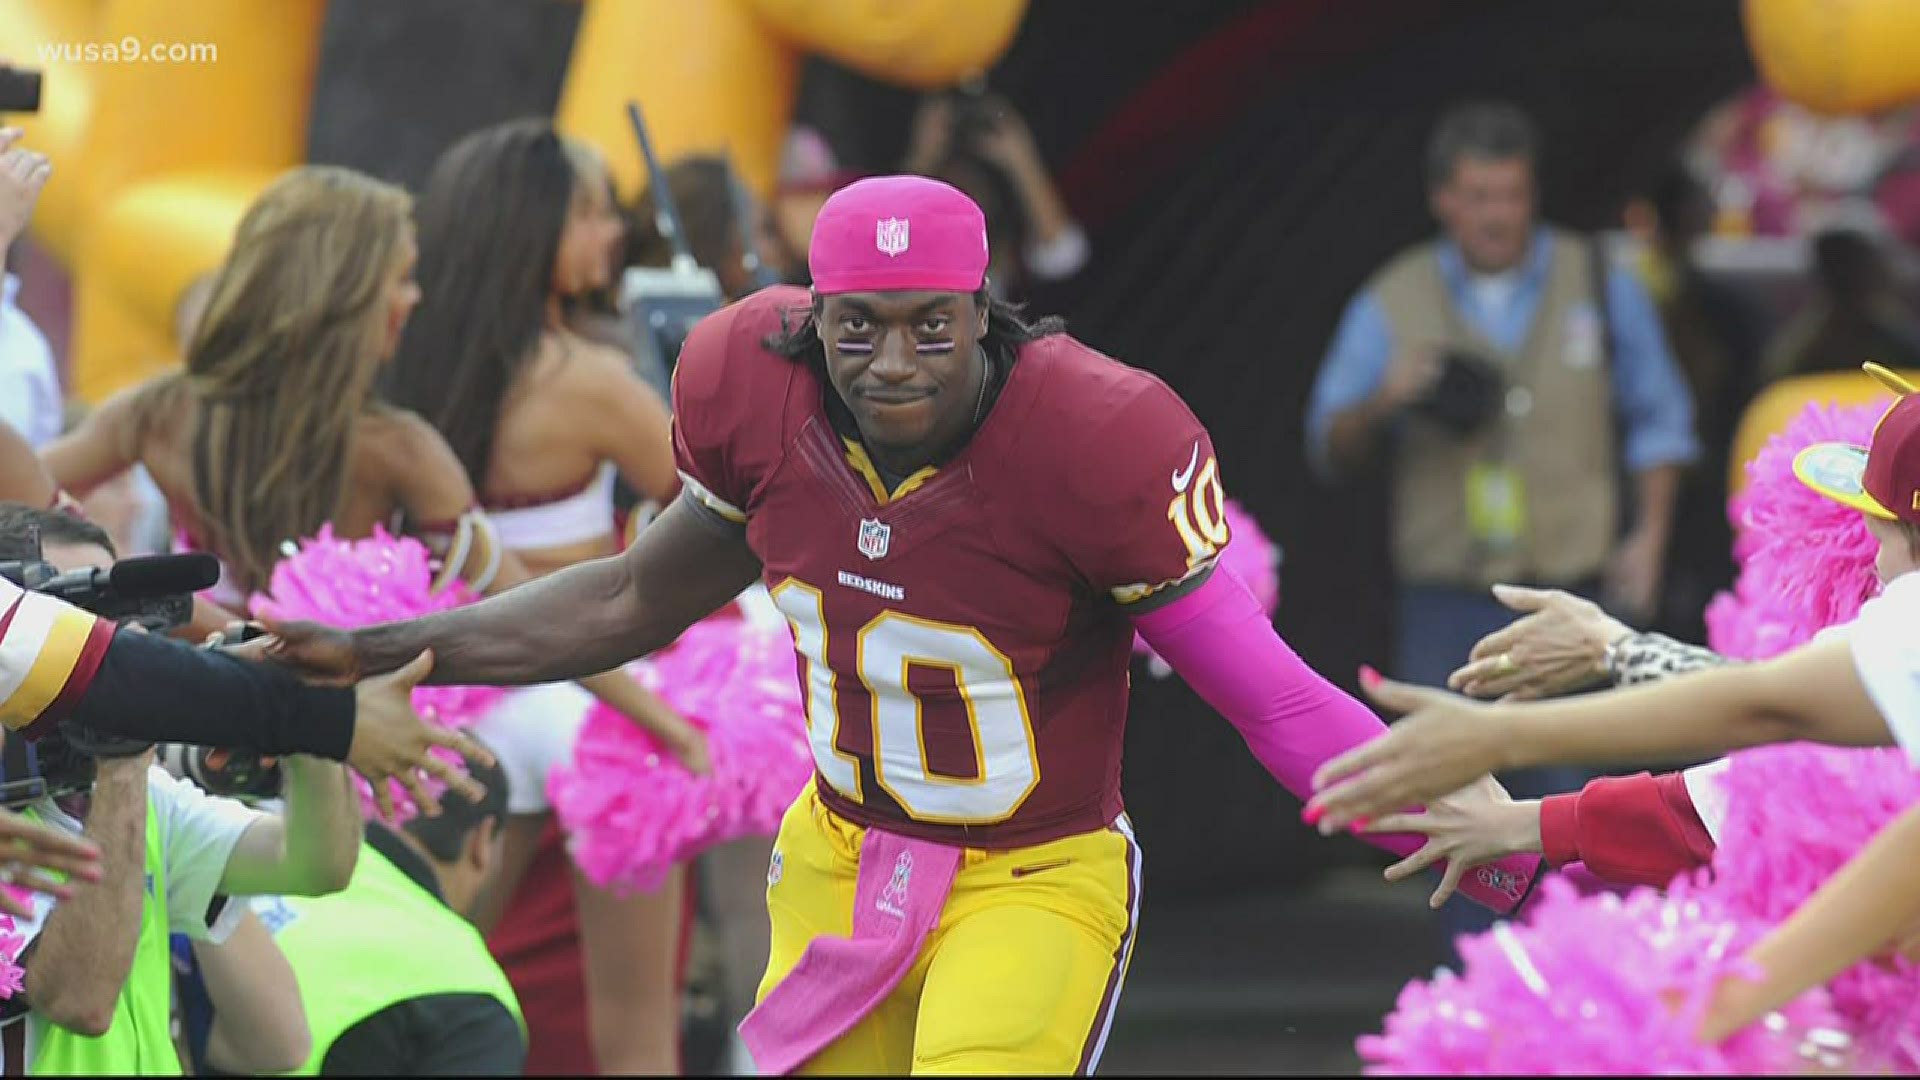 Robert Griffin III has been trying to keep himself busy while stuck in the house. This includes making Tik Tok videos with his wife and family.